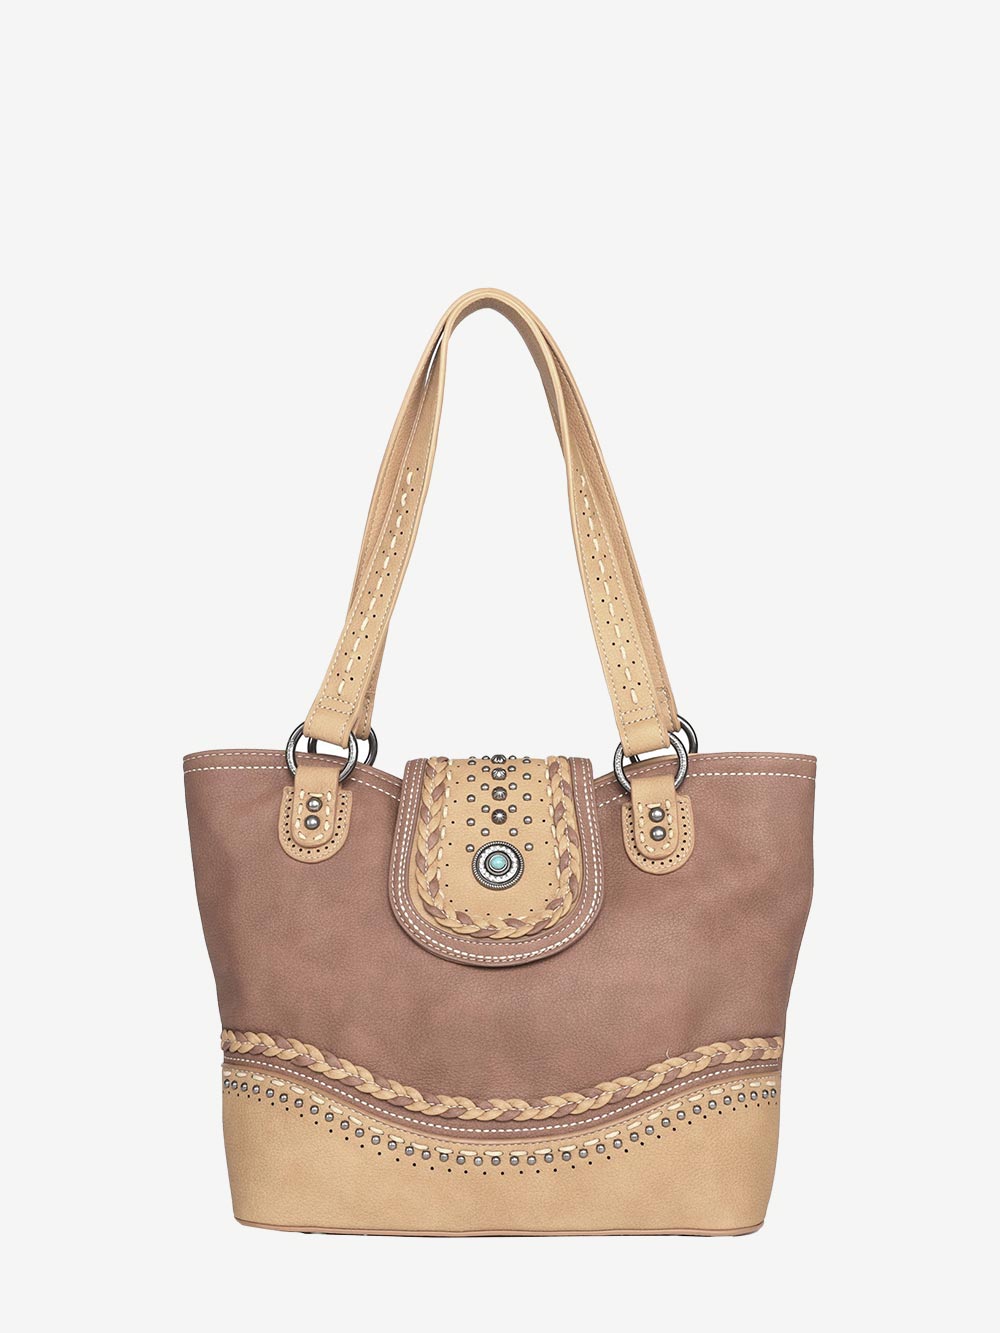 (Sale) Montana West Concho Collection Flap Concealed Carry Tote - Montana West World